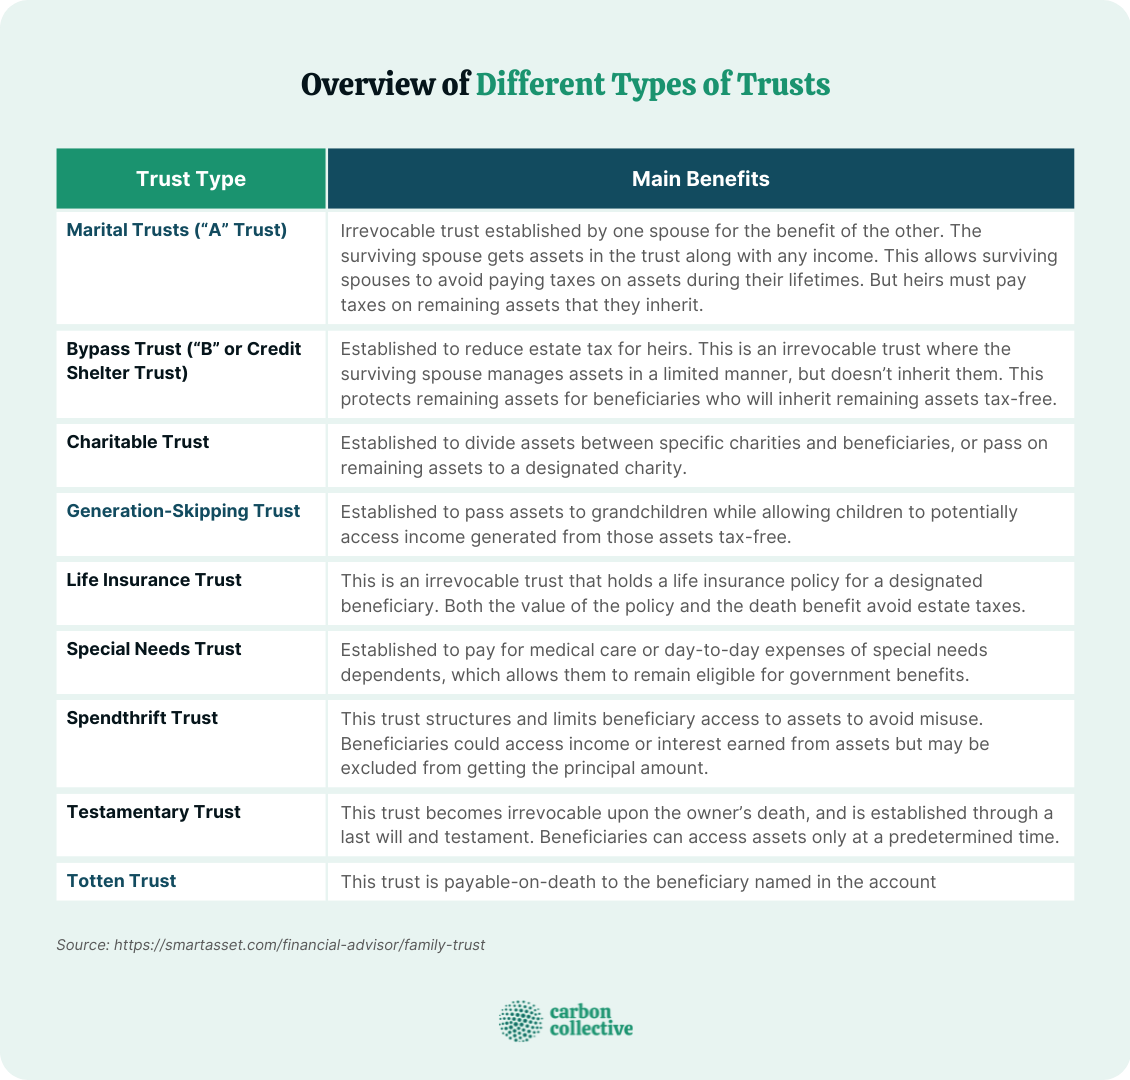 What Are the Different Types of Trusts?